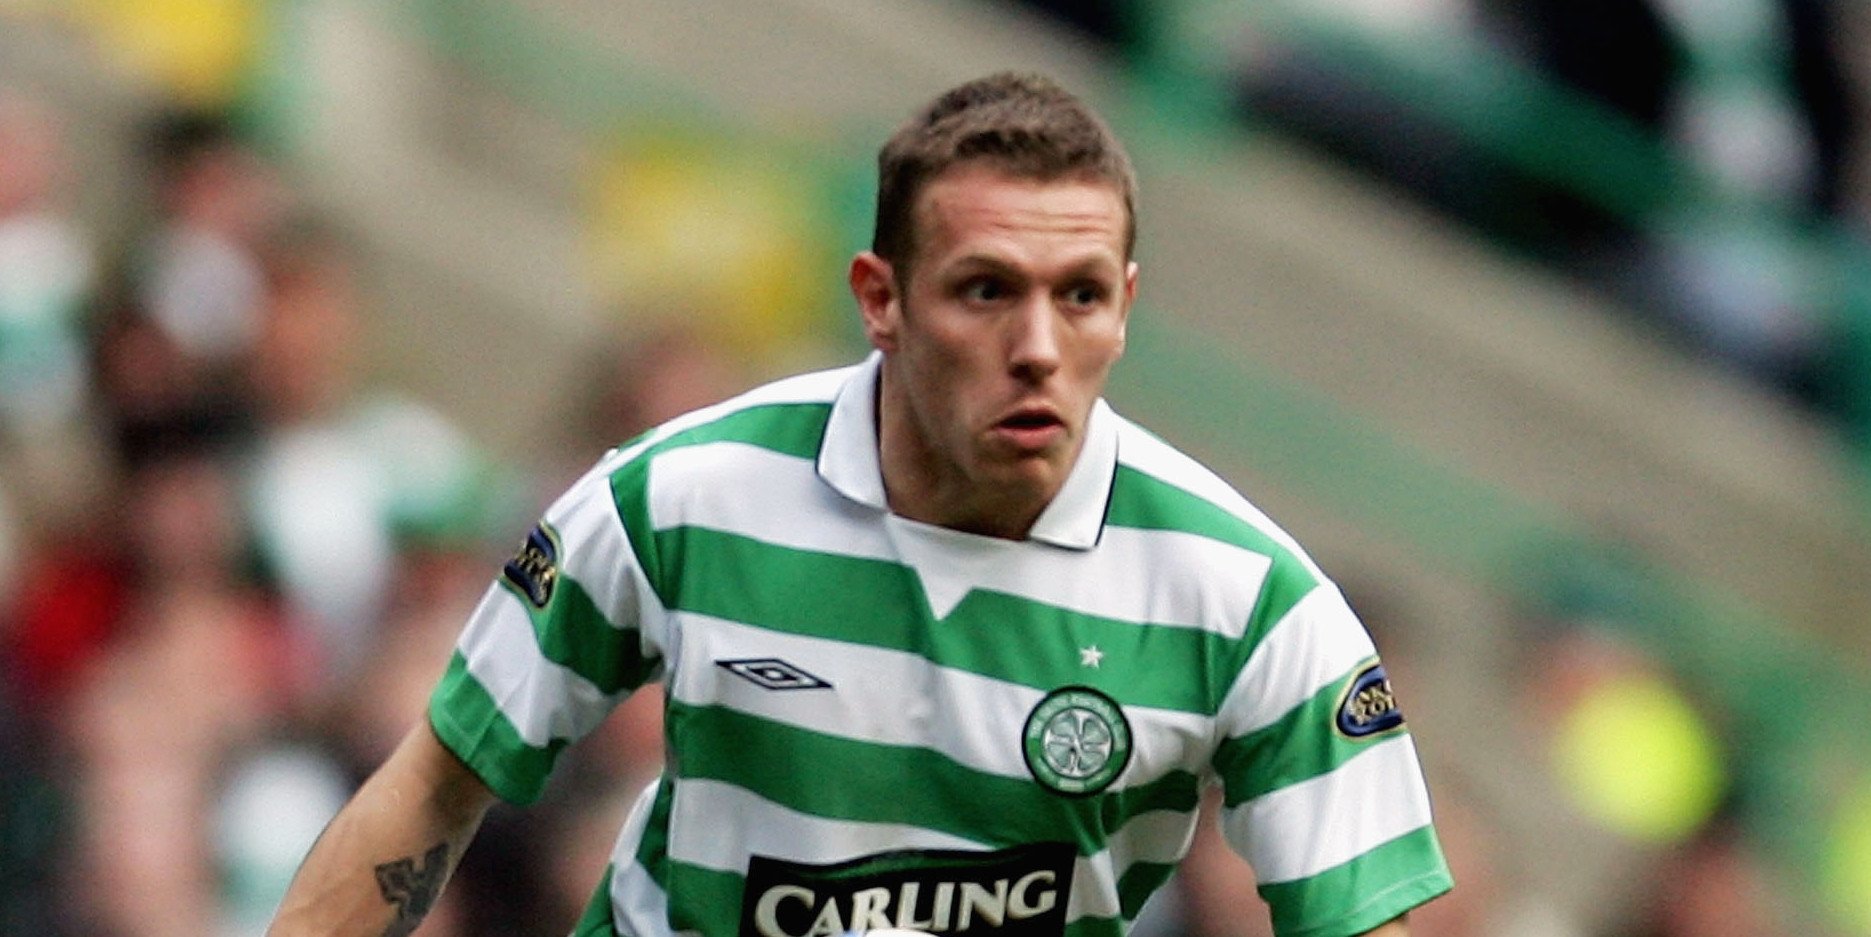 Go to away grounds and they take over; Craig Bellamy lauds Celtic